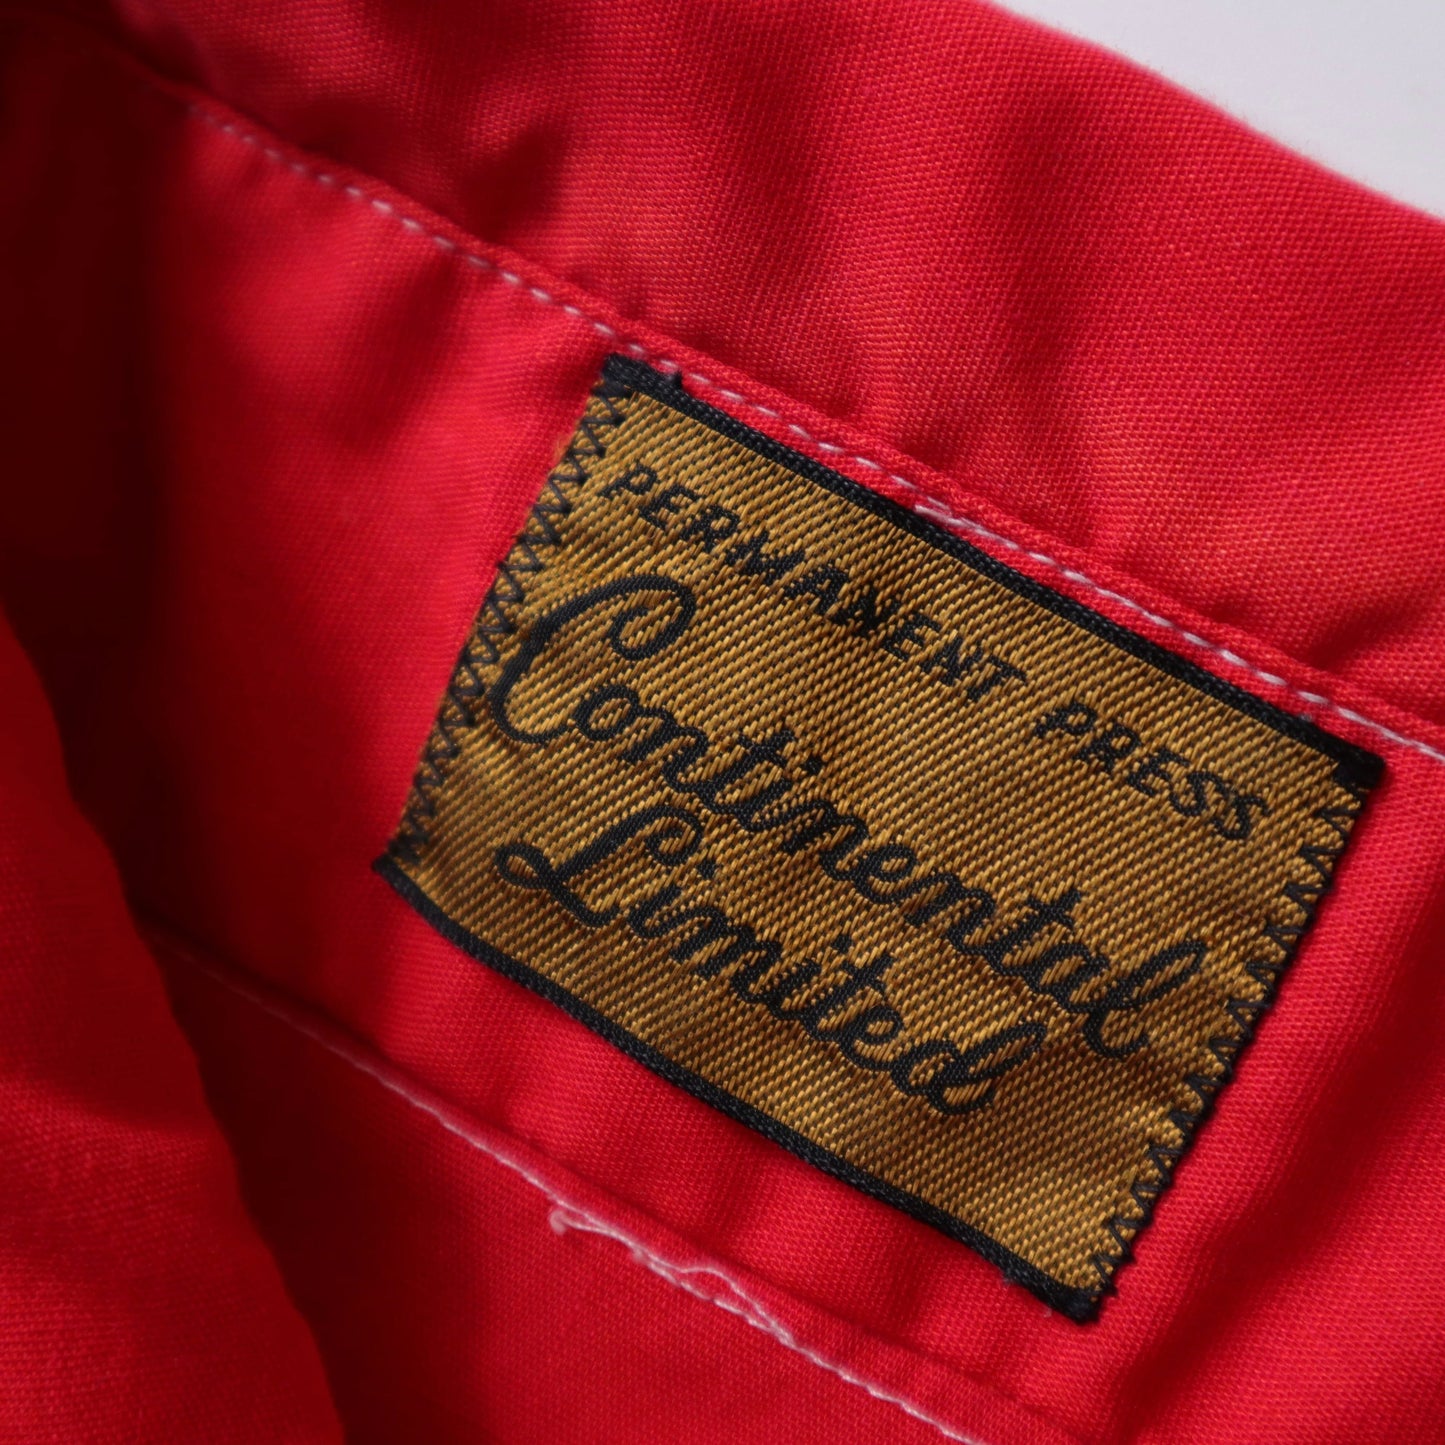 1970s Continental Limited red arrow collar western shirt